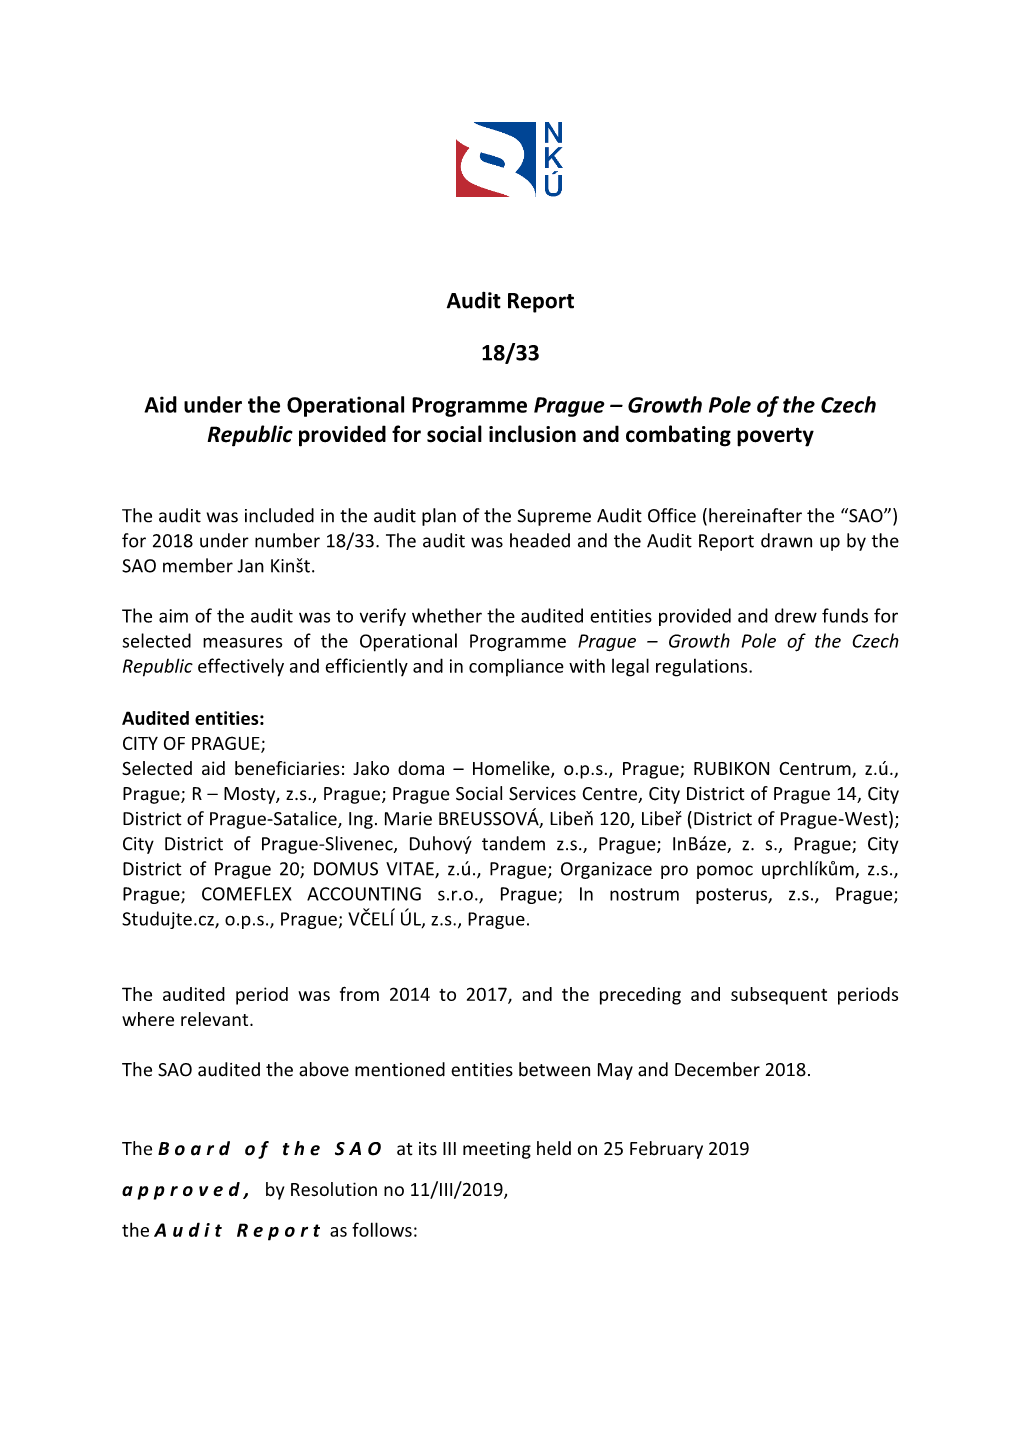 Audit Report No 18/33 Aid Under the Operational Programme Prague